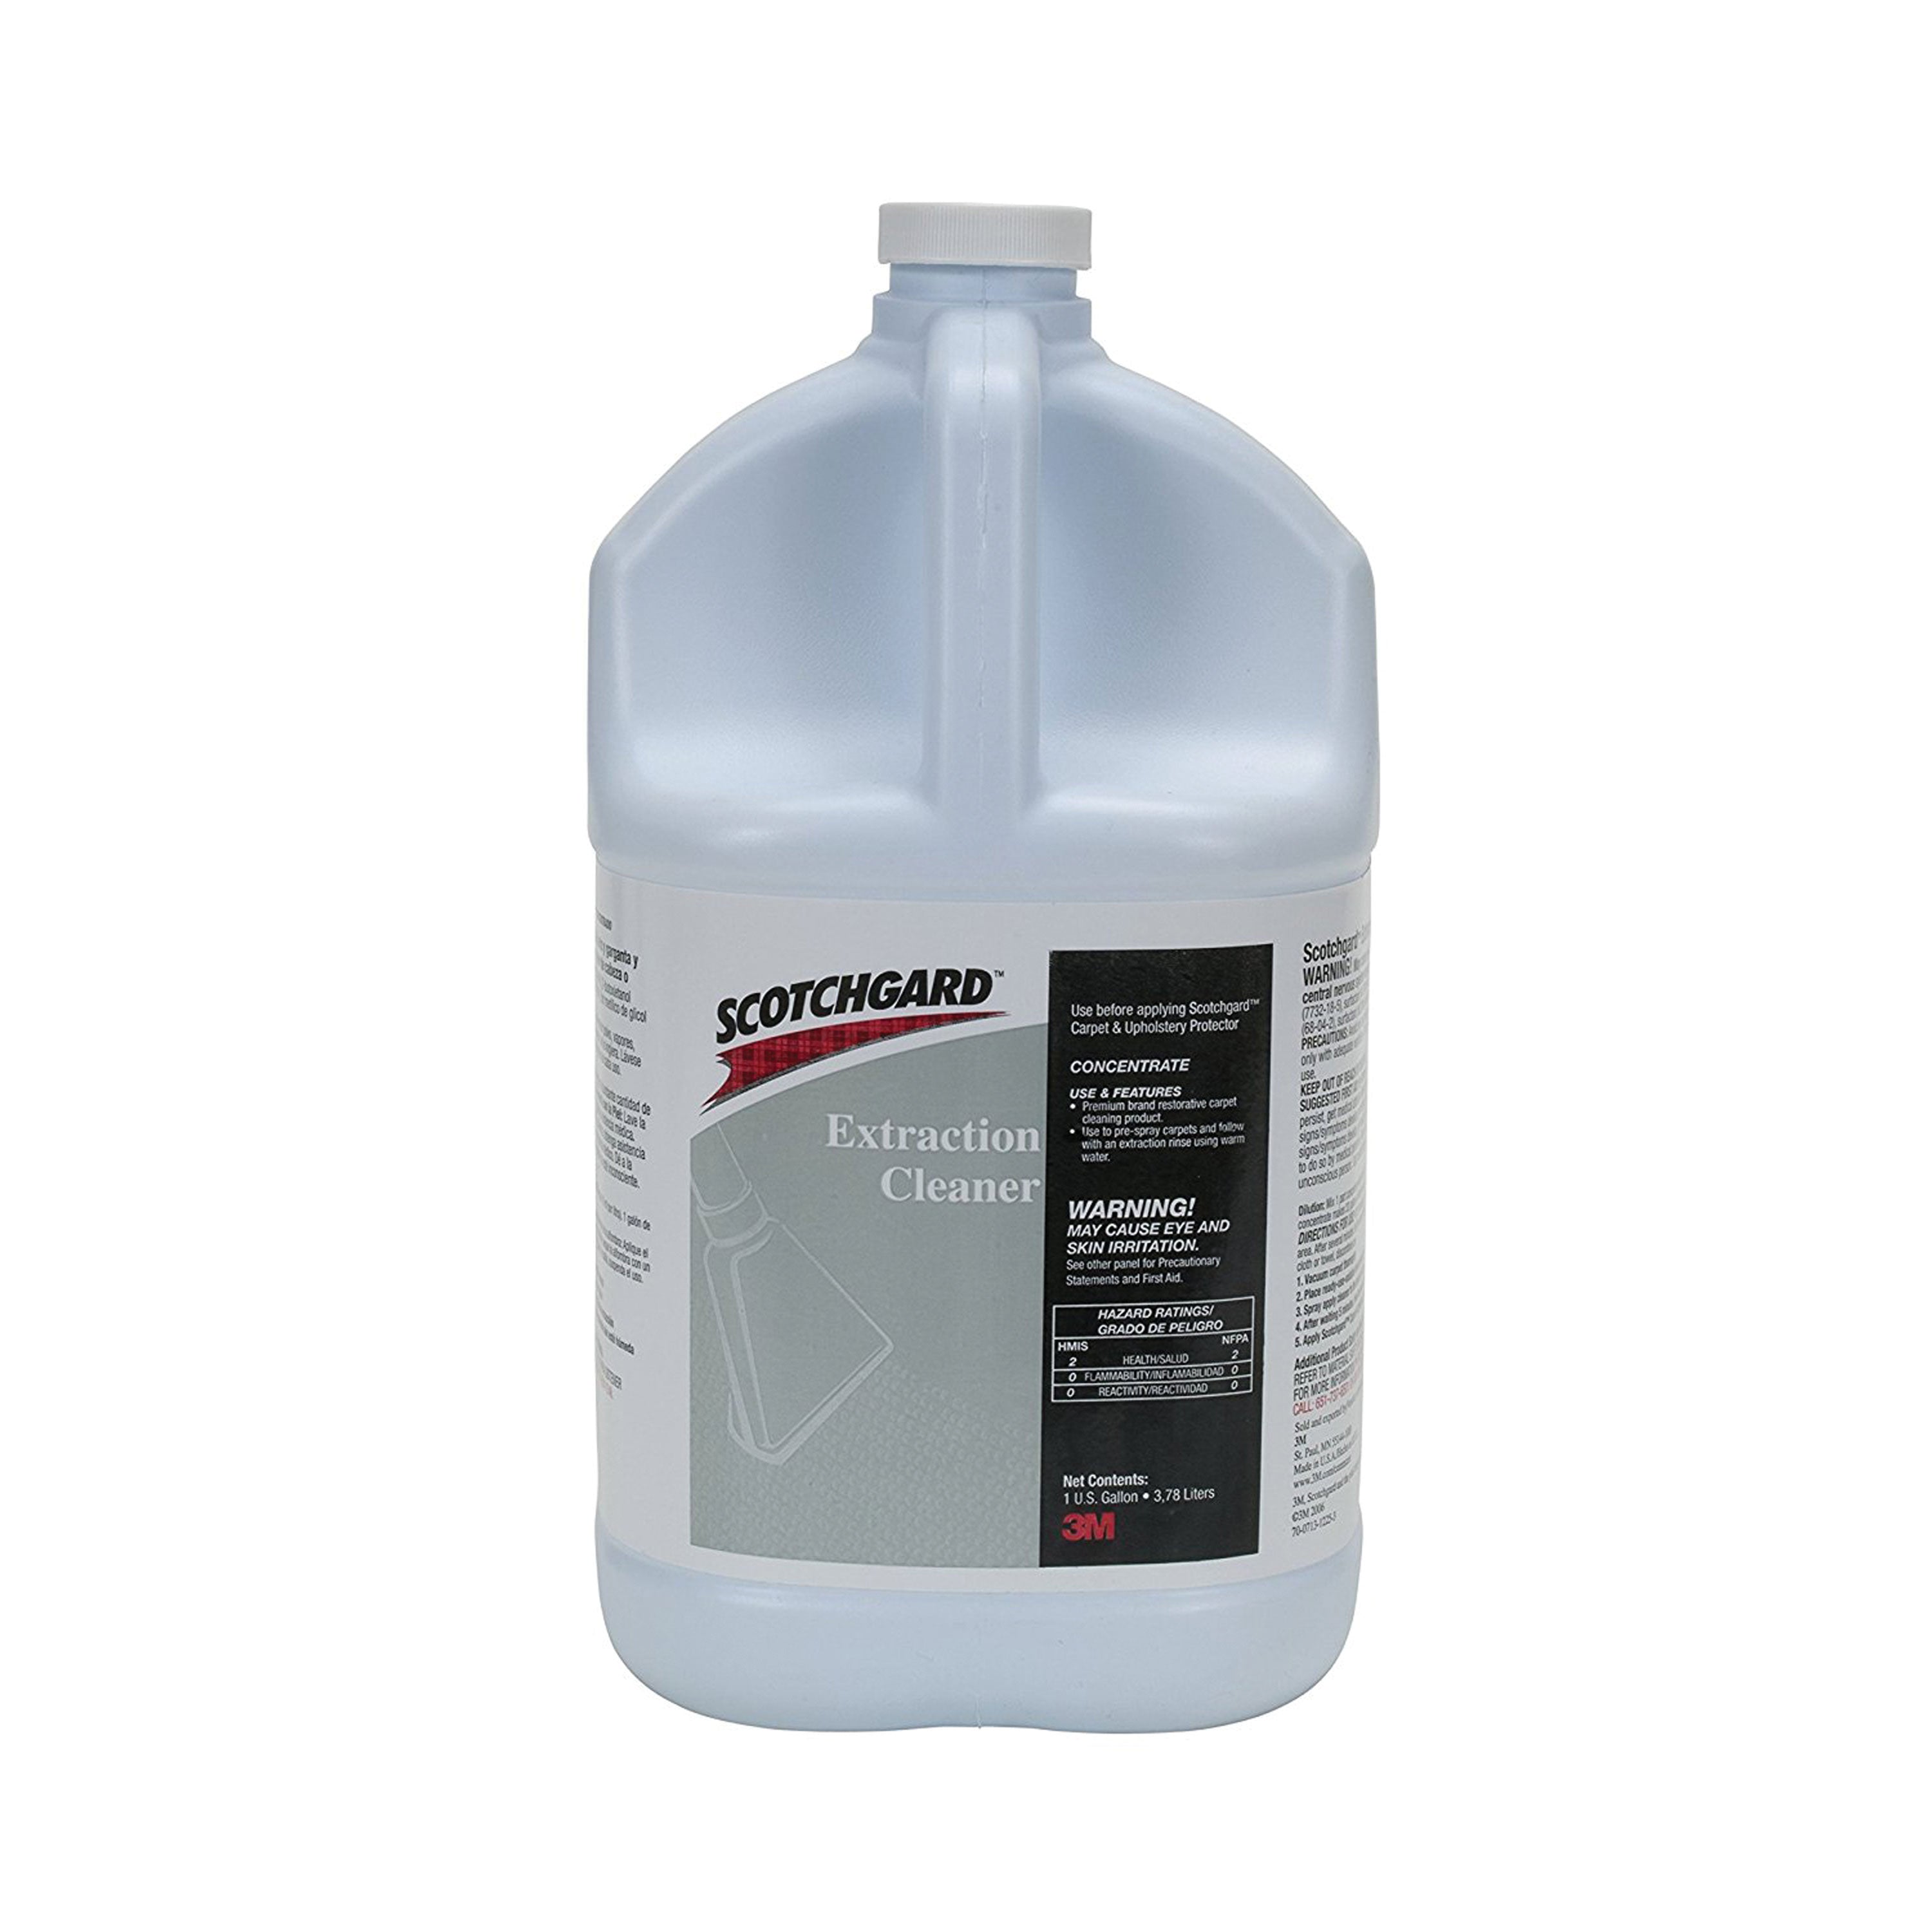 3M 05719 Scotchgard Extraction Cleaner Concentrate - Gallon